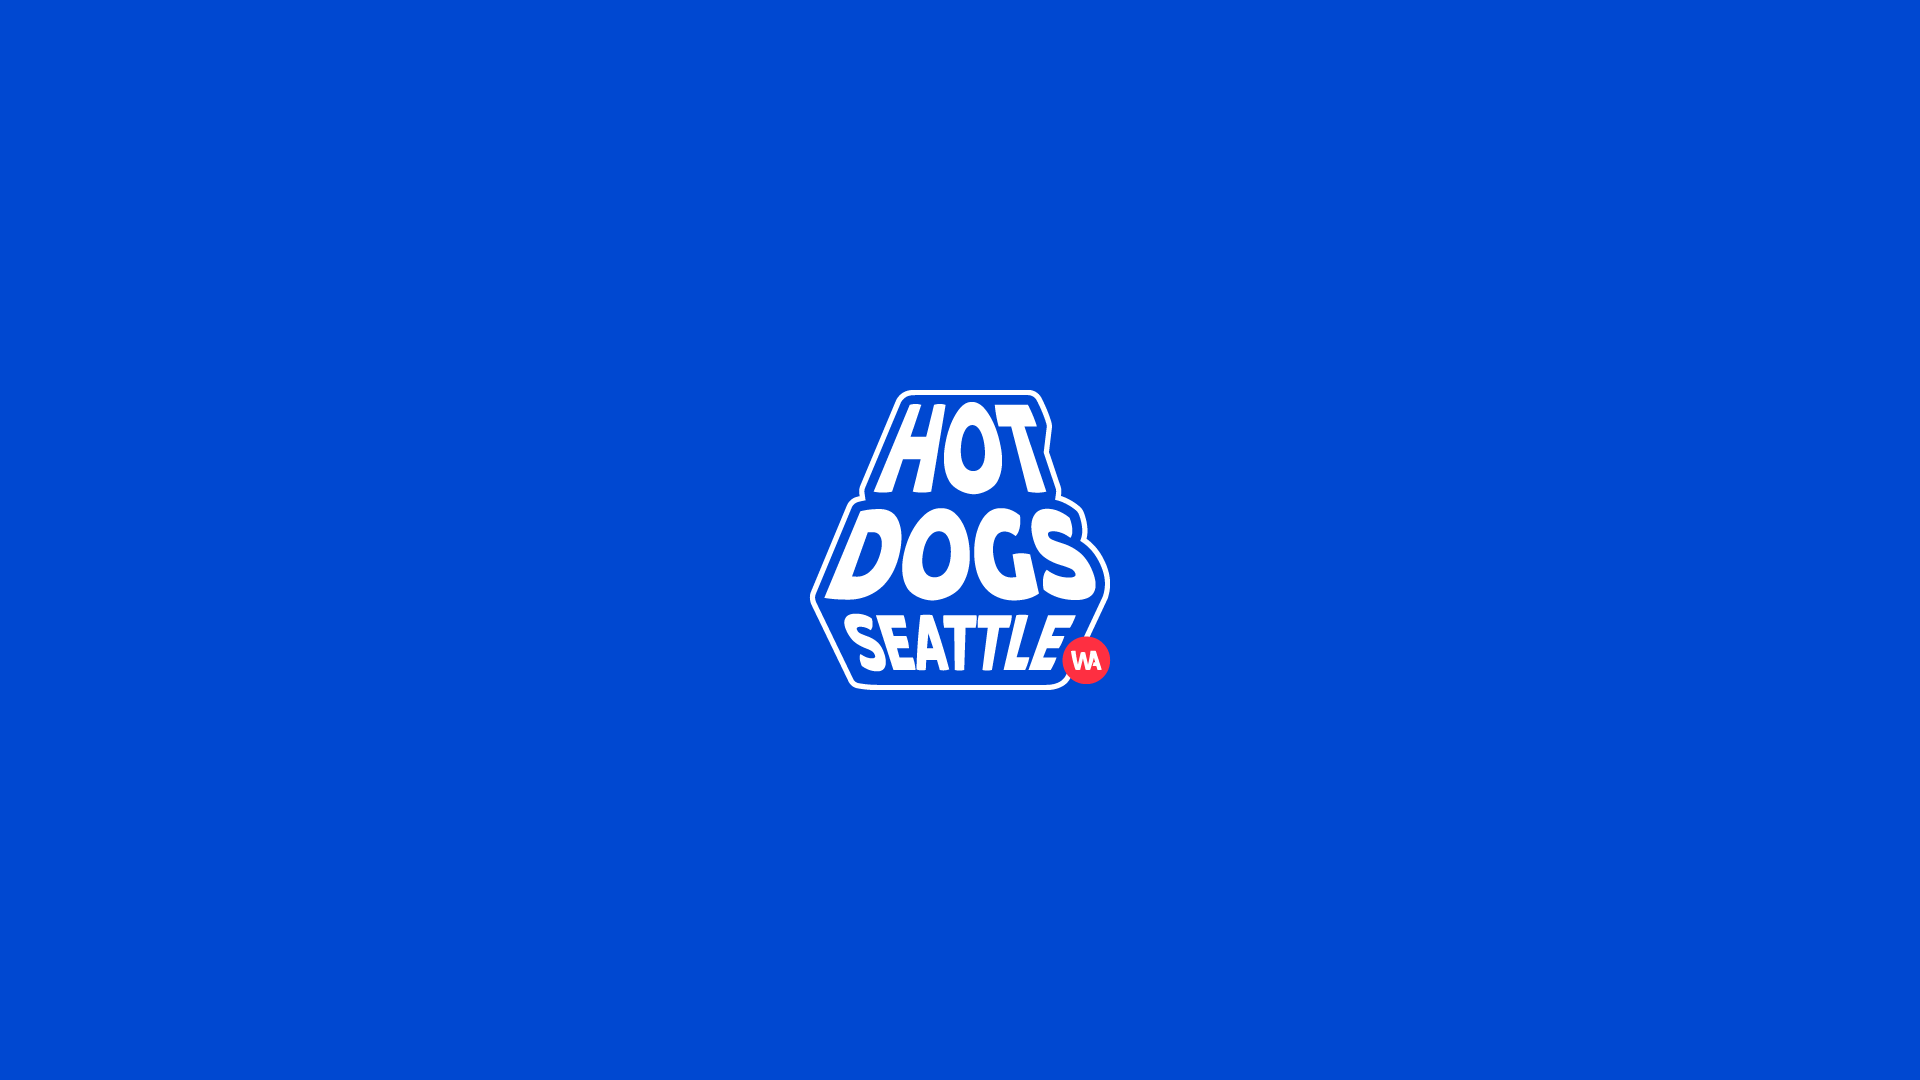 Hot Dogs Seattle